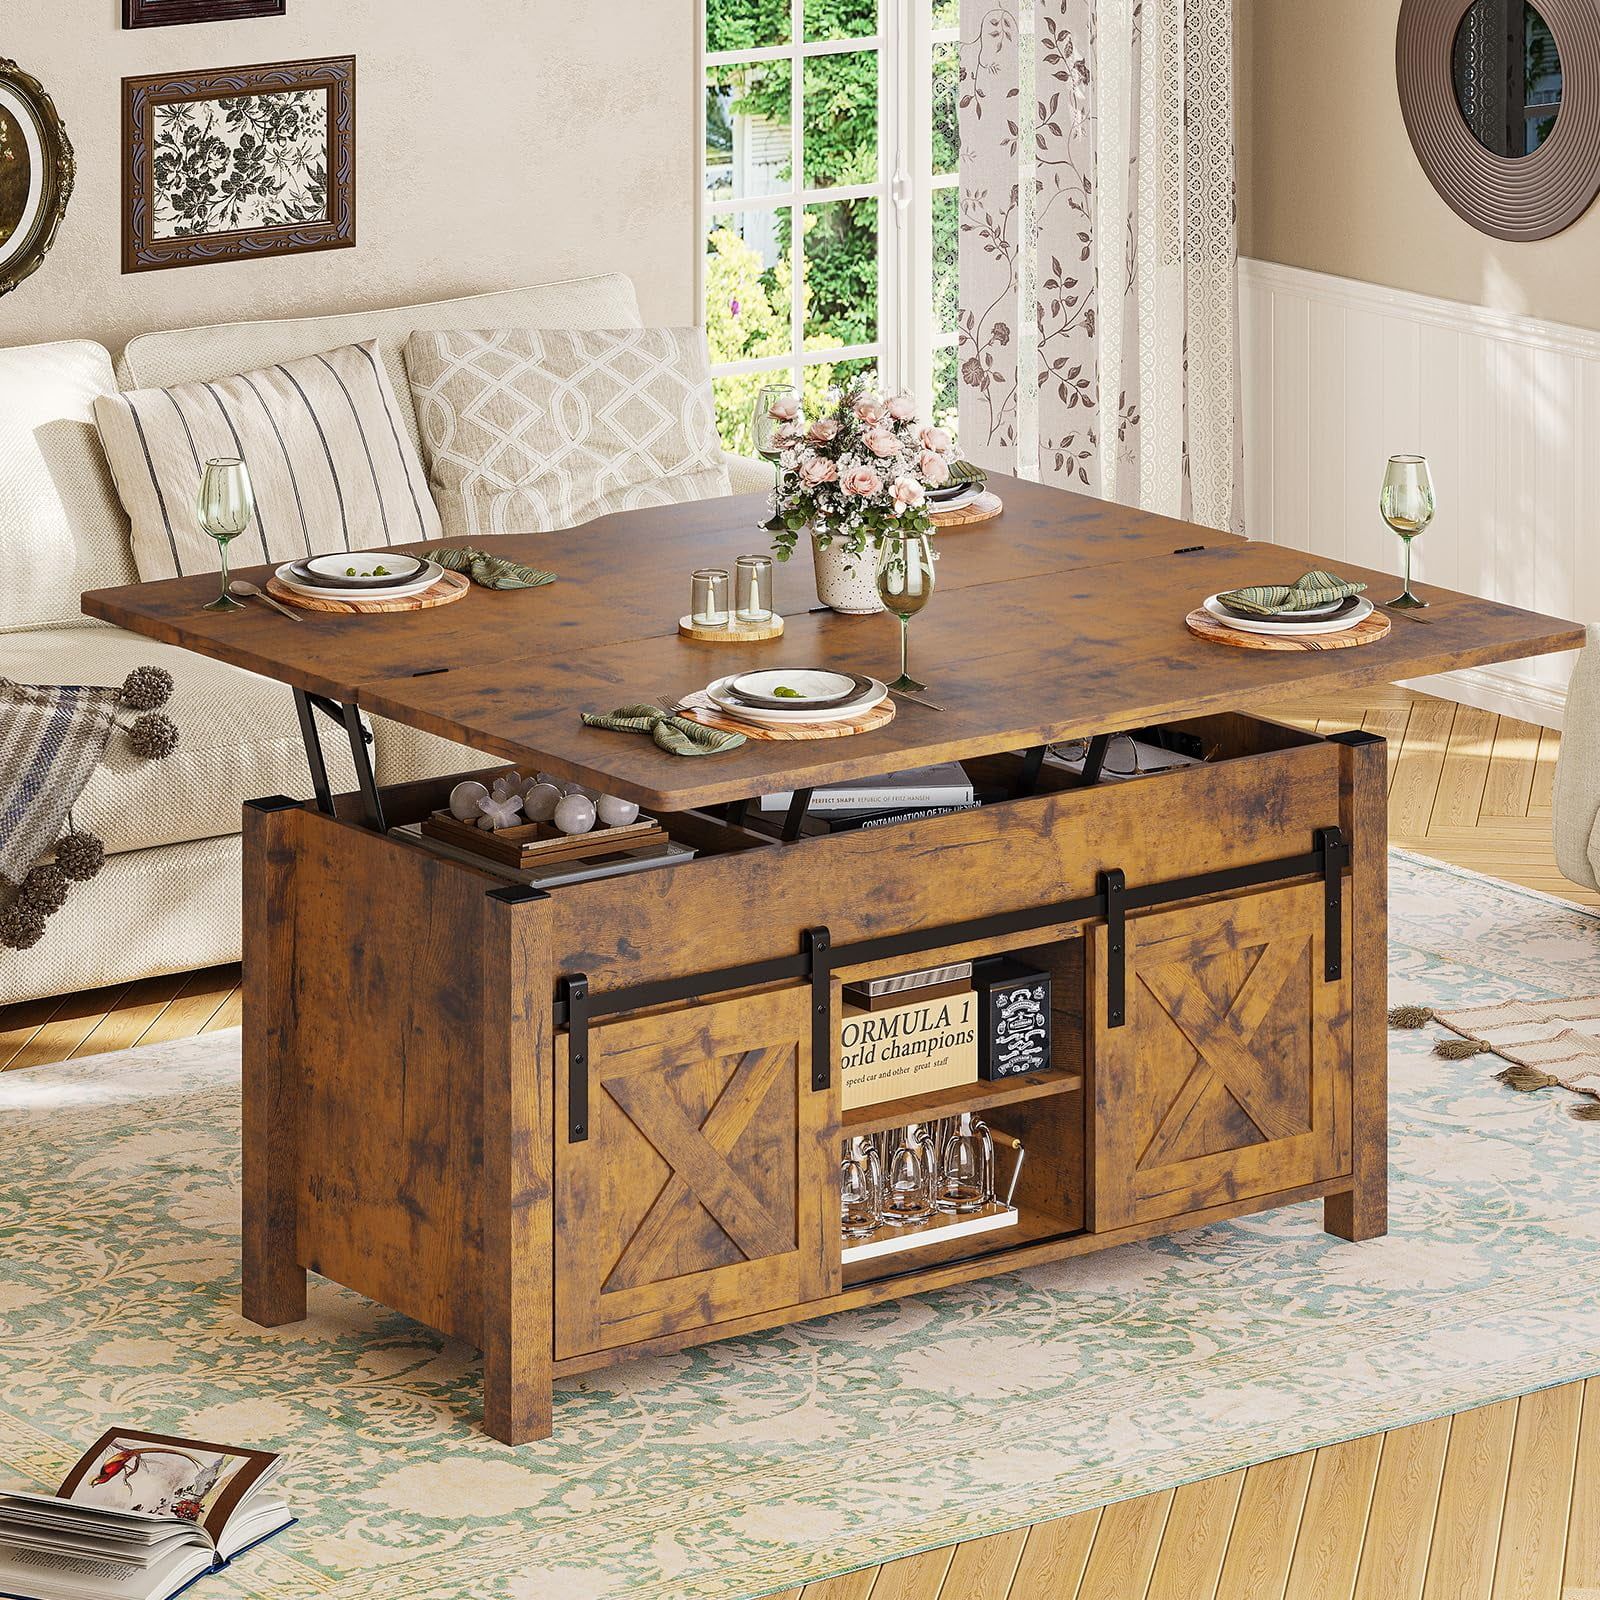 Coffee Table For Living Room, Farmhouse Lift Top Coffee Tables With Storage  And Hidden Compartment, Rising Tabletop Center Table For Living Room  Reception Room, Rustic Brown – Walmart Pertaining To Lift Top Coffee Tables With Hidden Storage Compartments (View 6 of 15)